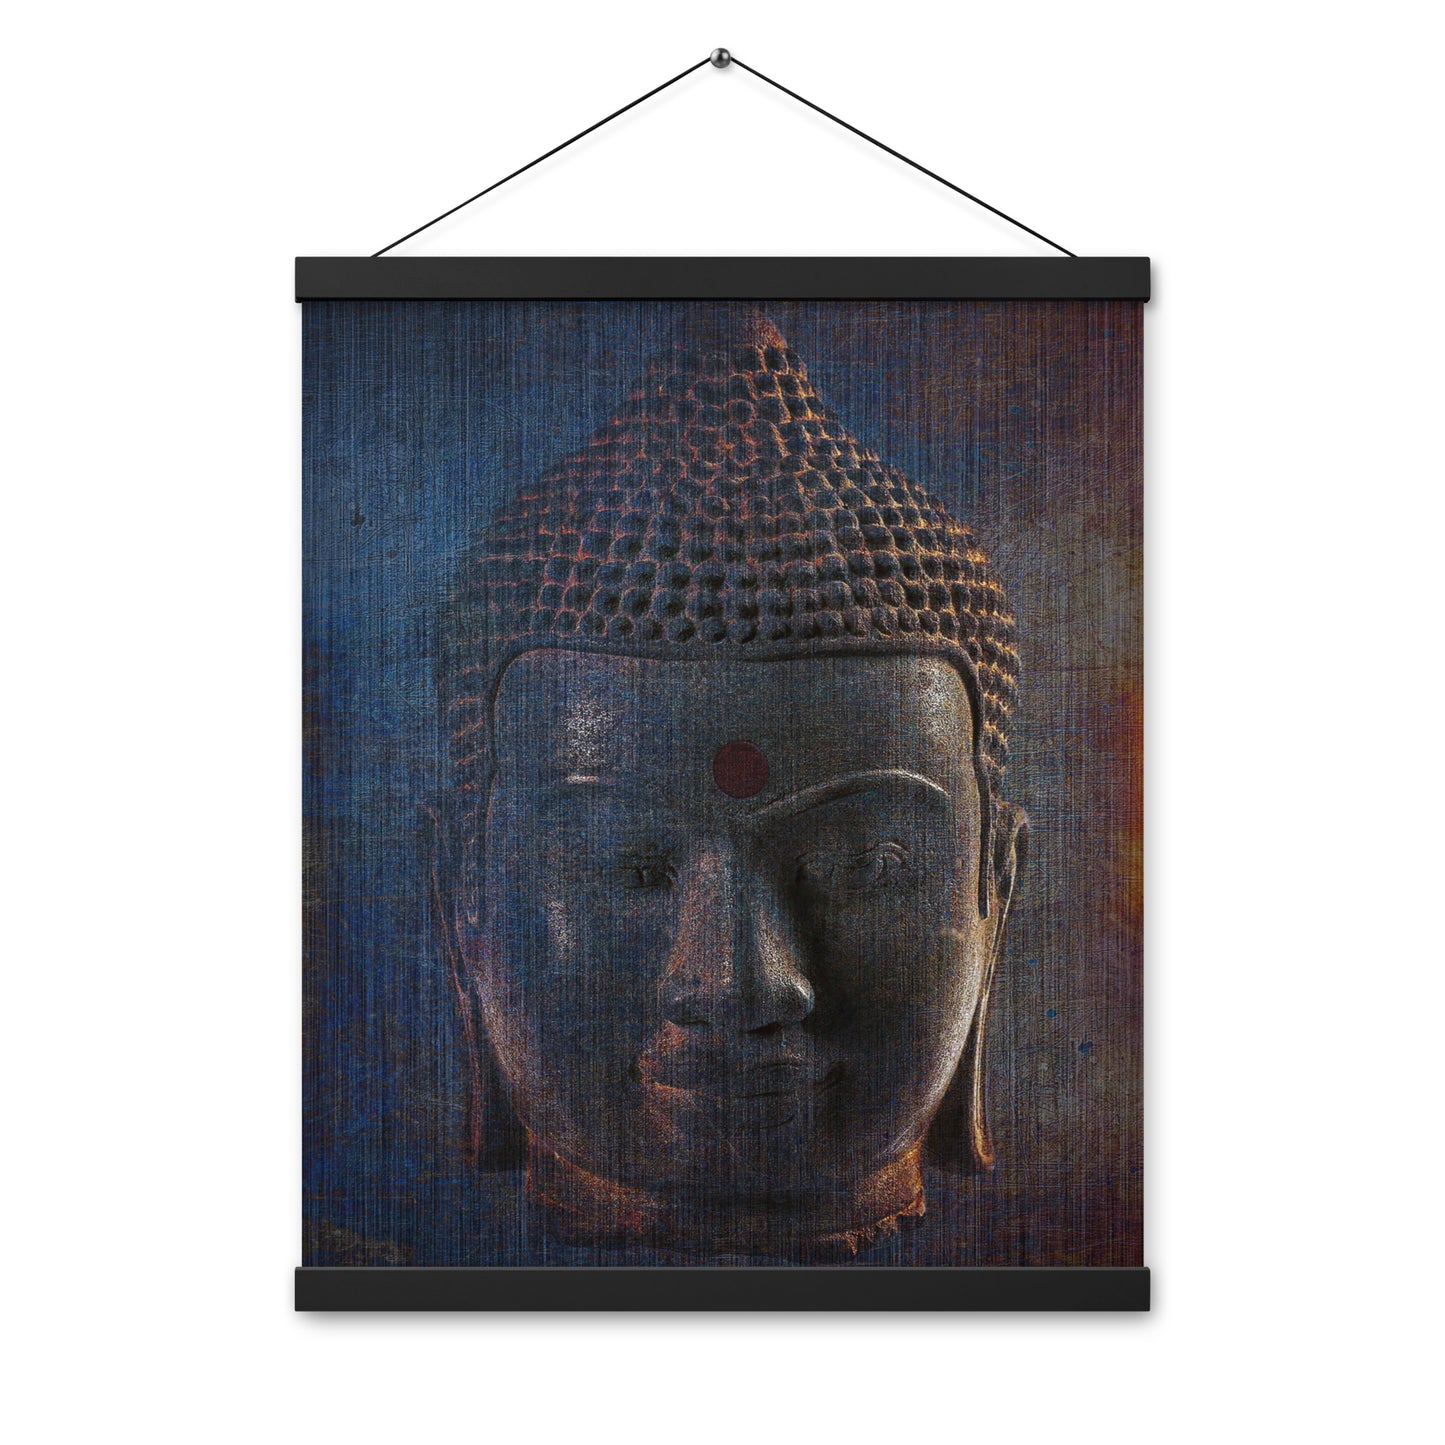 Spiritual and Meditation Wall Artwork Modern Art Blue Buddha Head Printed on Archival Paper with Magnetic Wood Hangers 16x20